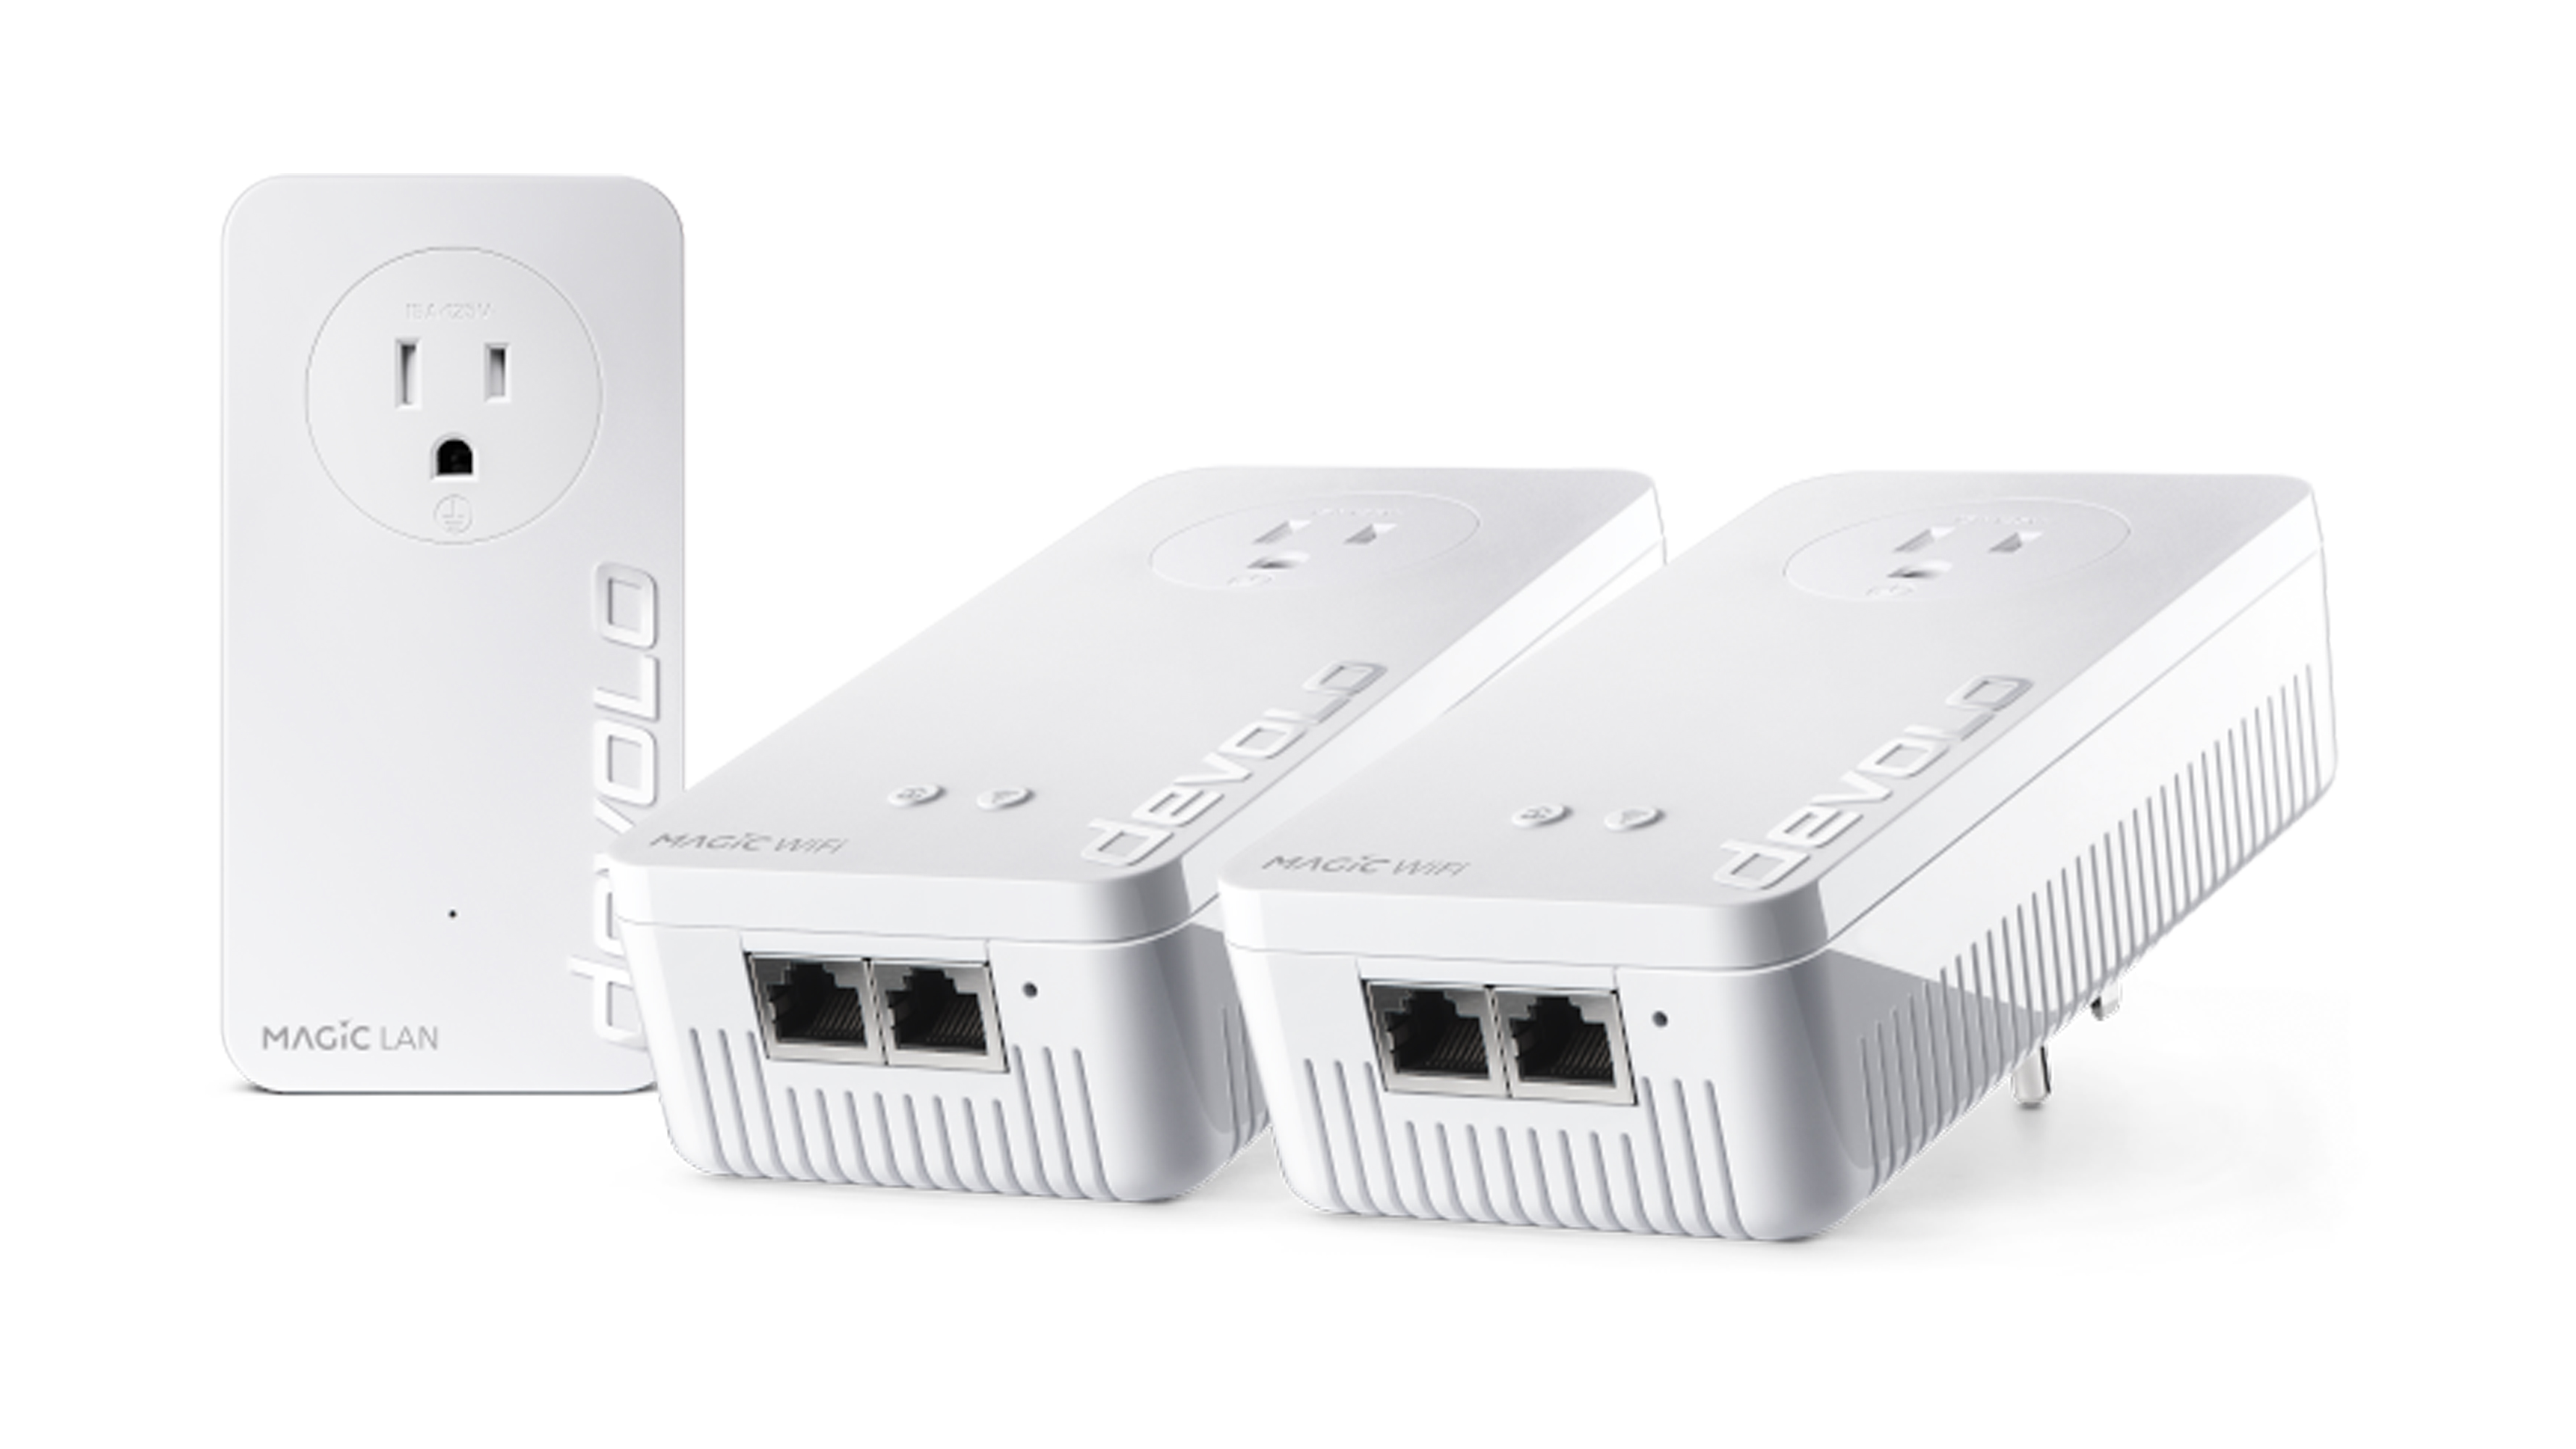 Devolo Mesh WiFi 2 and two nodes on a white background